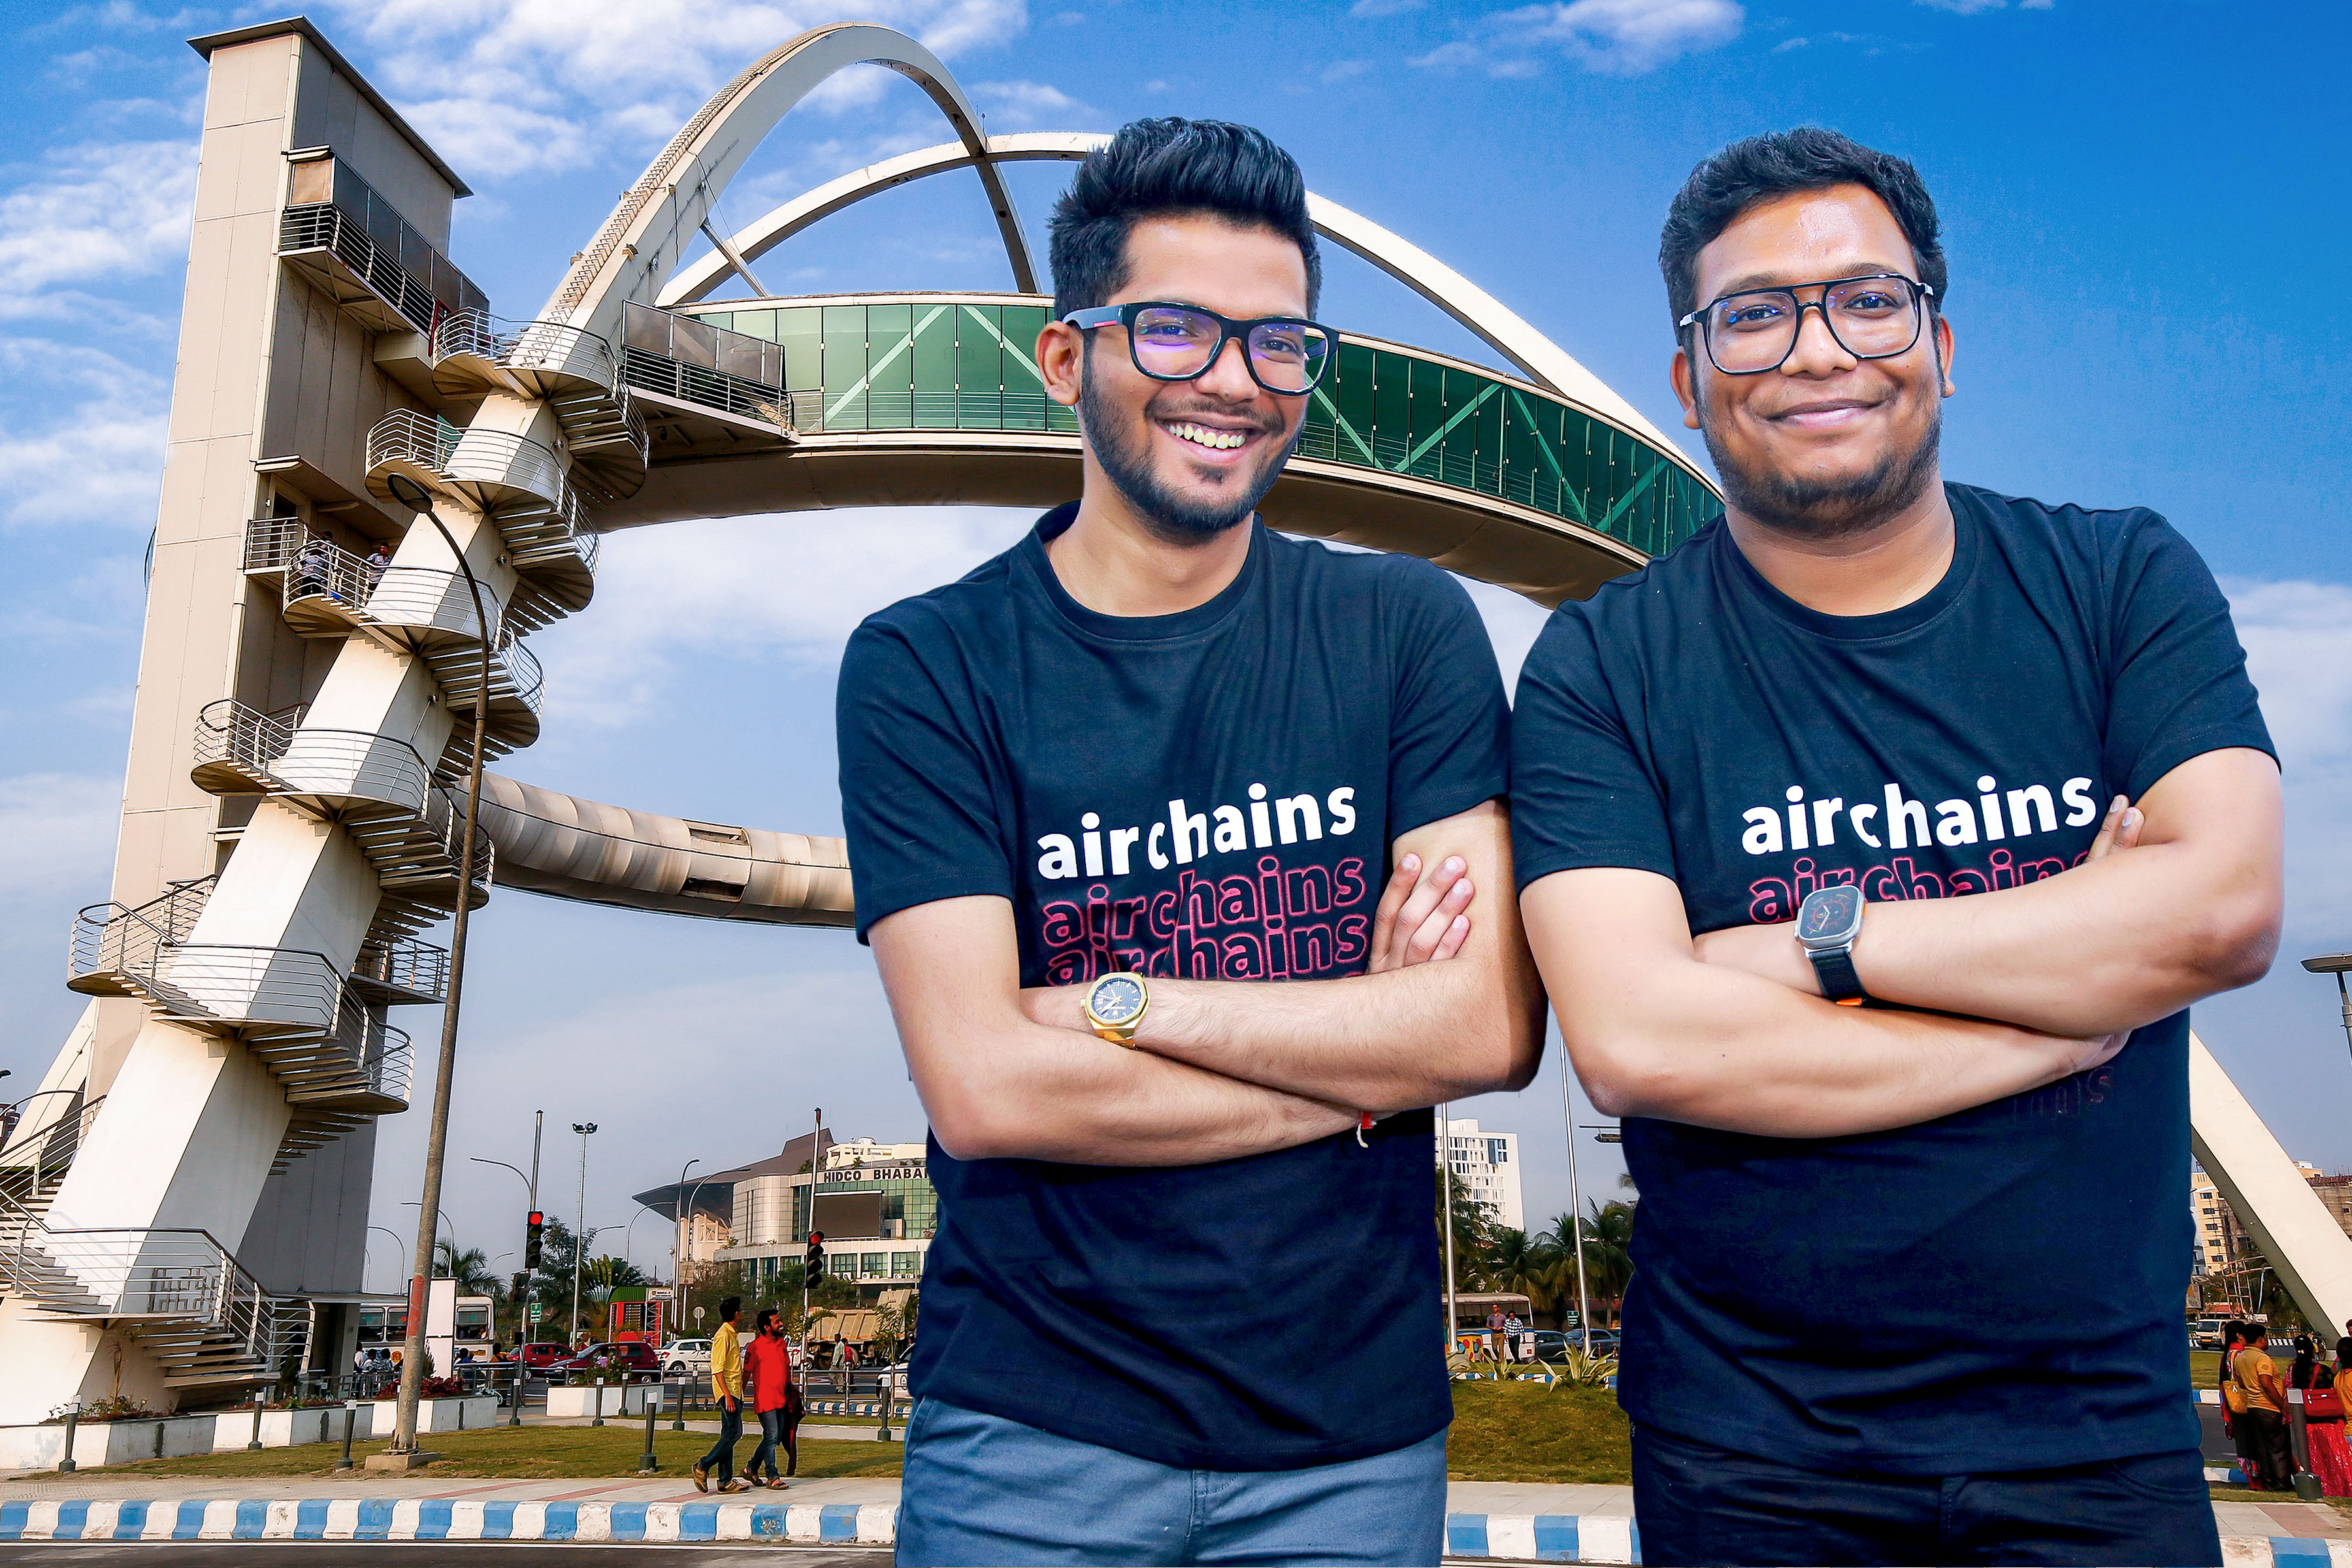 Web3 startup Airchains partners with West Bengal's government institution